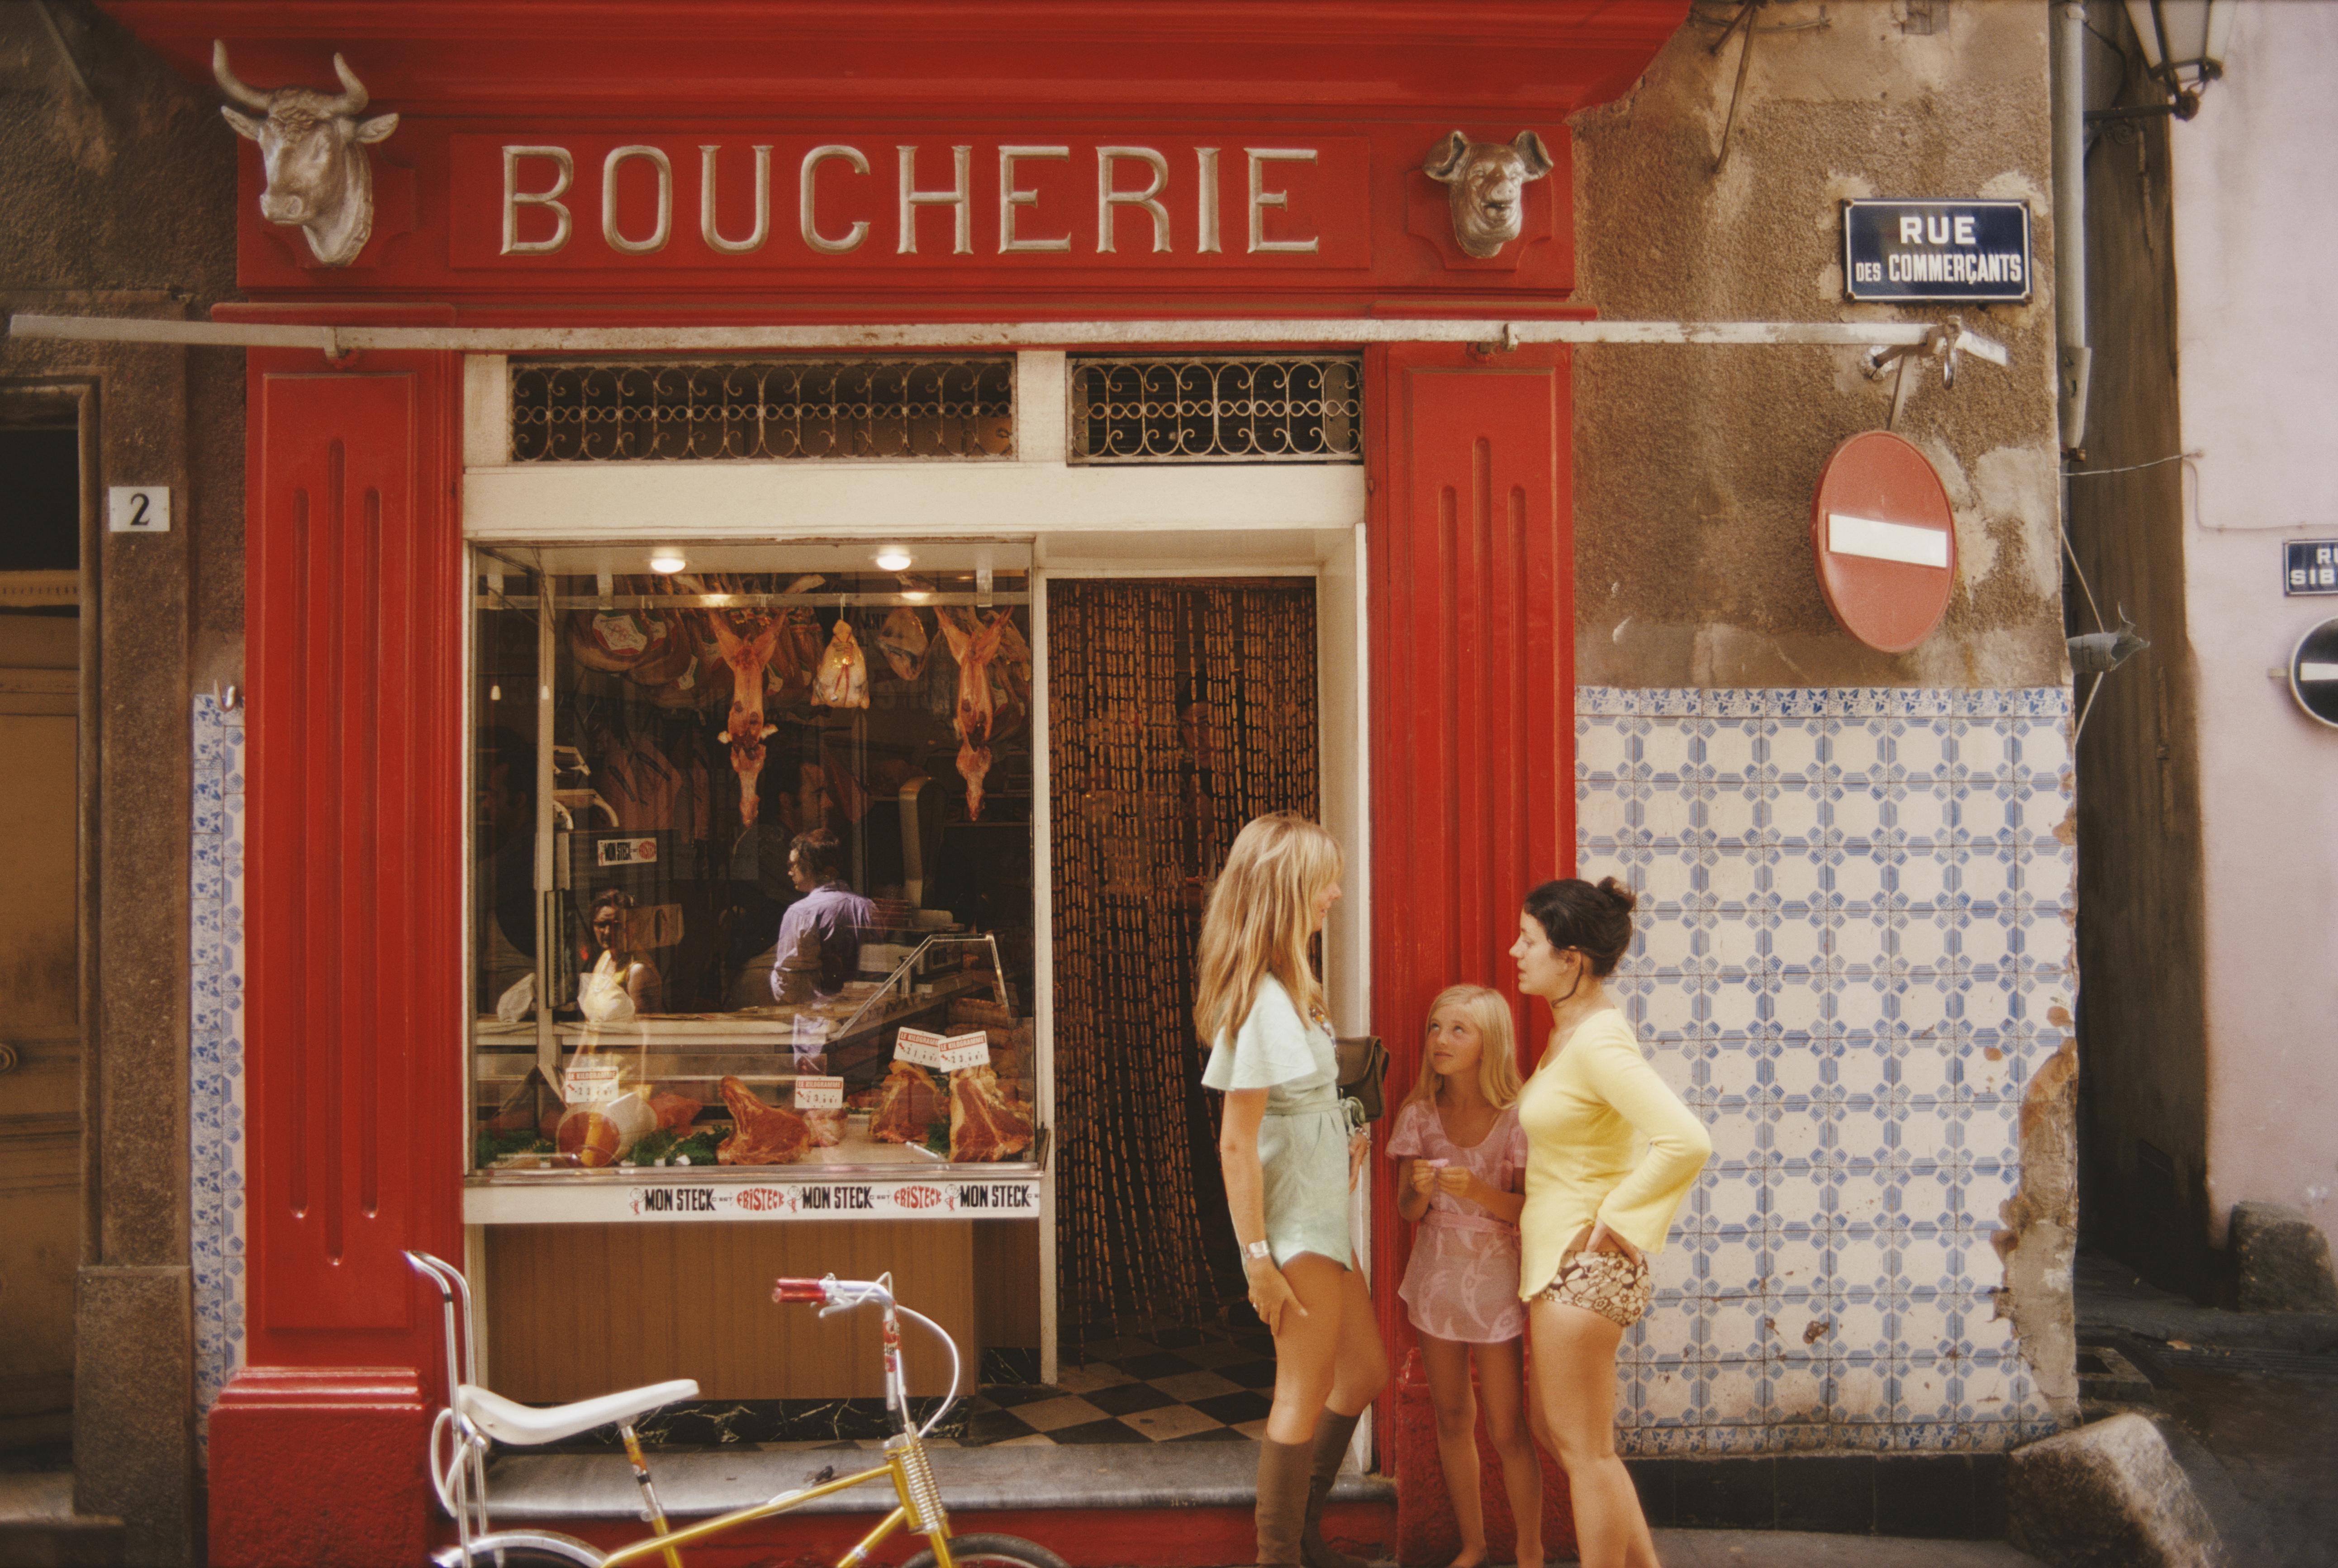 'Saint-Tropez Boucherie' 1971 Slim Aarons Limited Estate Edition Print 

A boucherie or butcher's shop on Rue des Commercants in Saint-Tropez, on the French Riviera, August 1971. (Photo by Slim Aarons/Getty Images)

Produced from the original